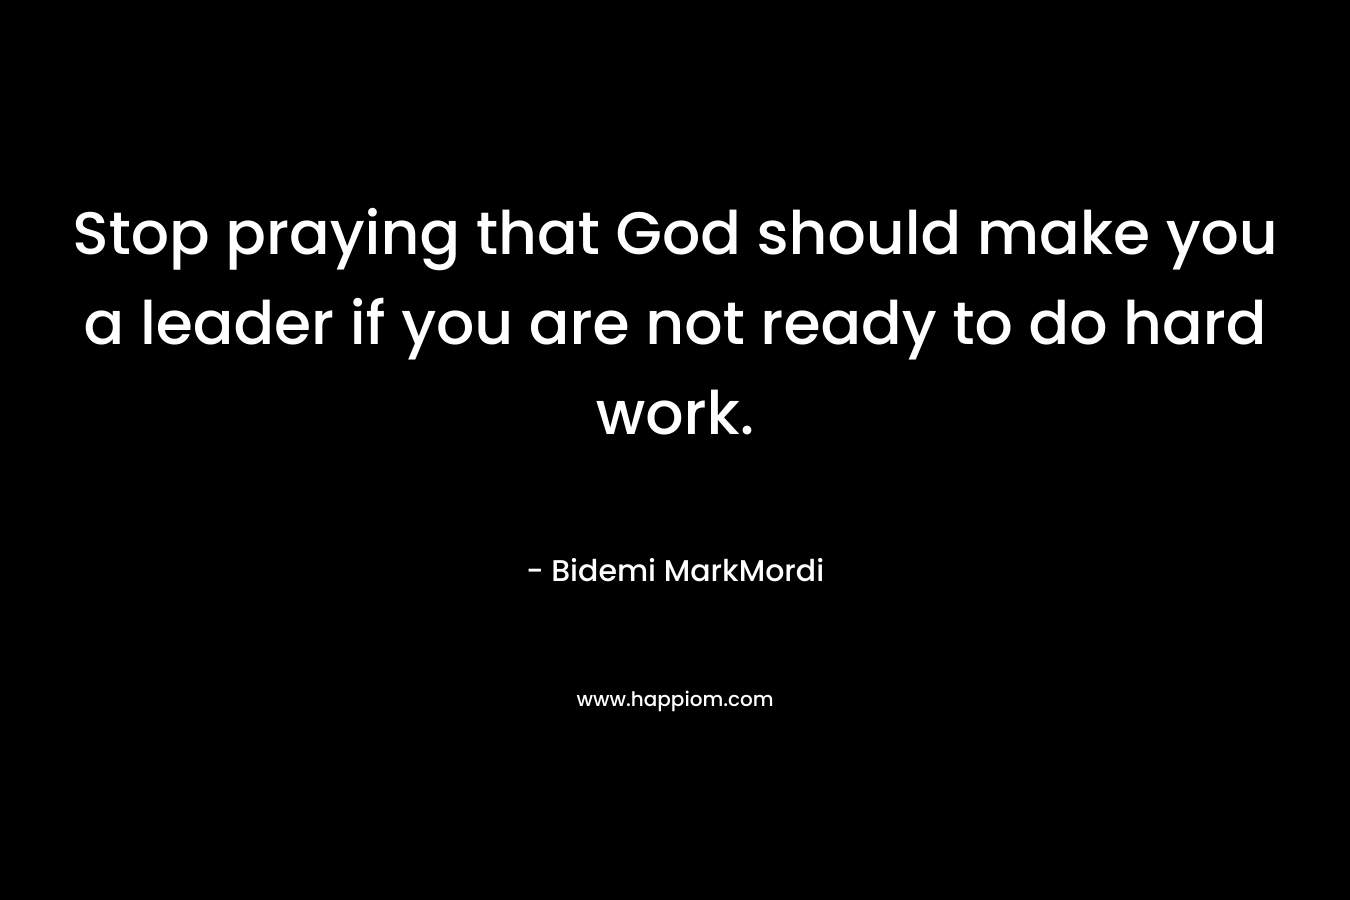 Stop praying that God should make you a leader if you are not ready to do hard work.